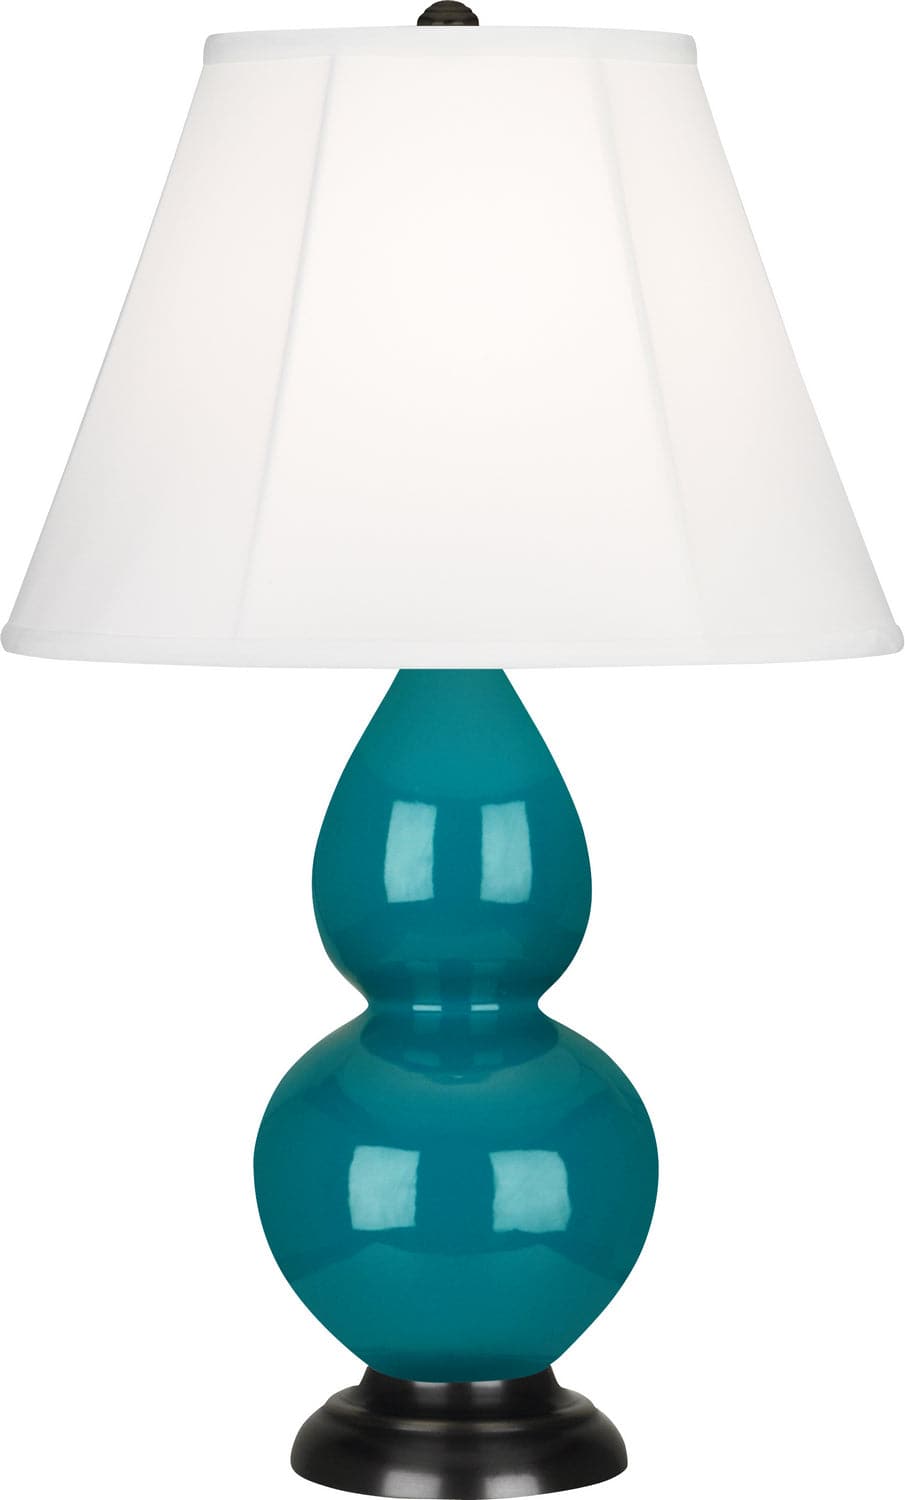 Robert Abbey - 1772 - One Light Accent Lamp - Small Double Gourd - Peacock Glazed